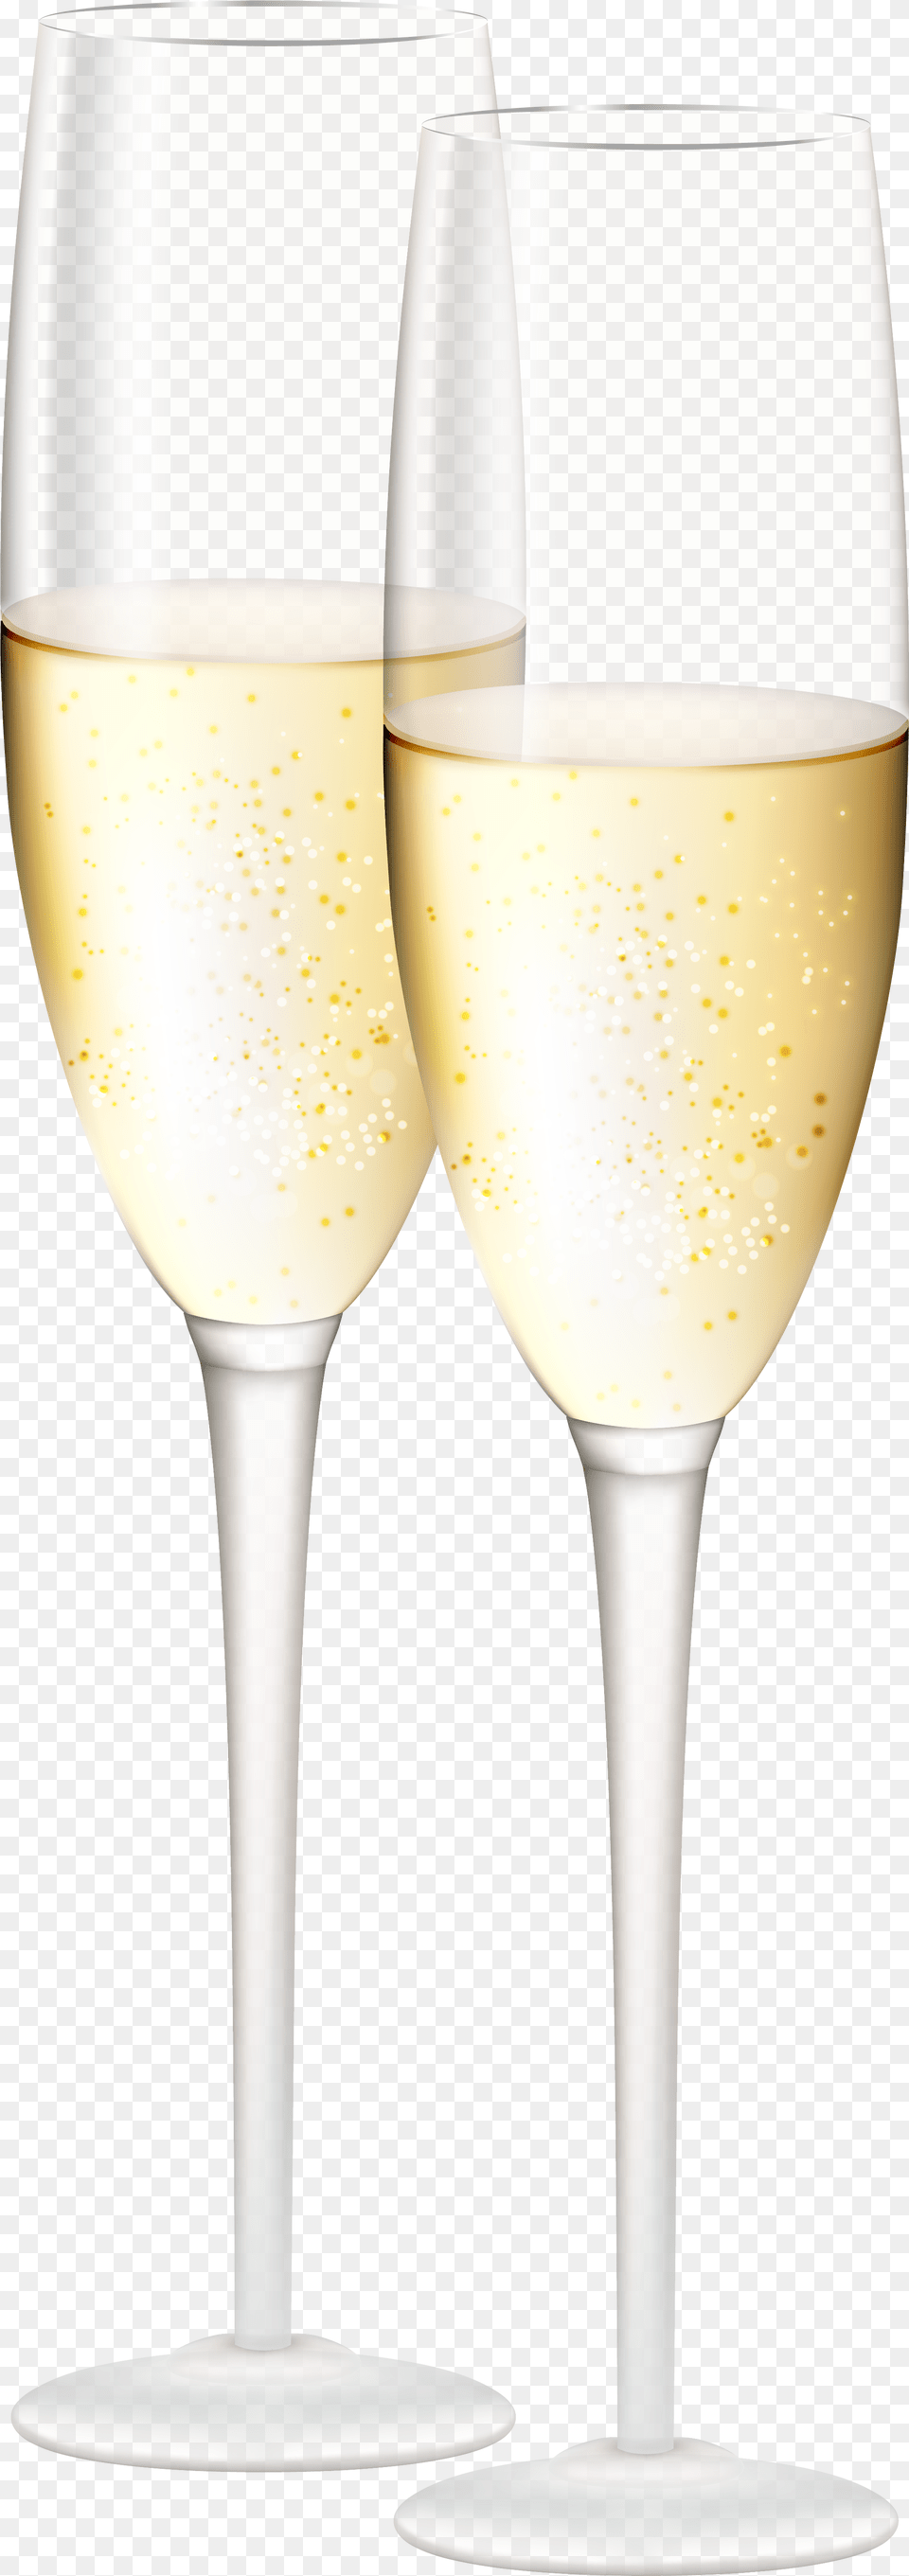 White Wine Champagne Glass Cocktail Wine Glass Champagne Glass Transparent, Alcohol, Beverage, Liquor, Wine Glass Free Png Download